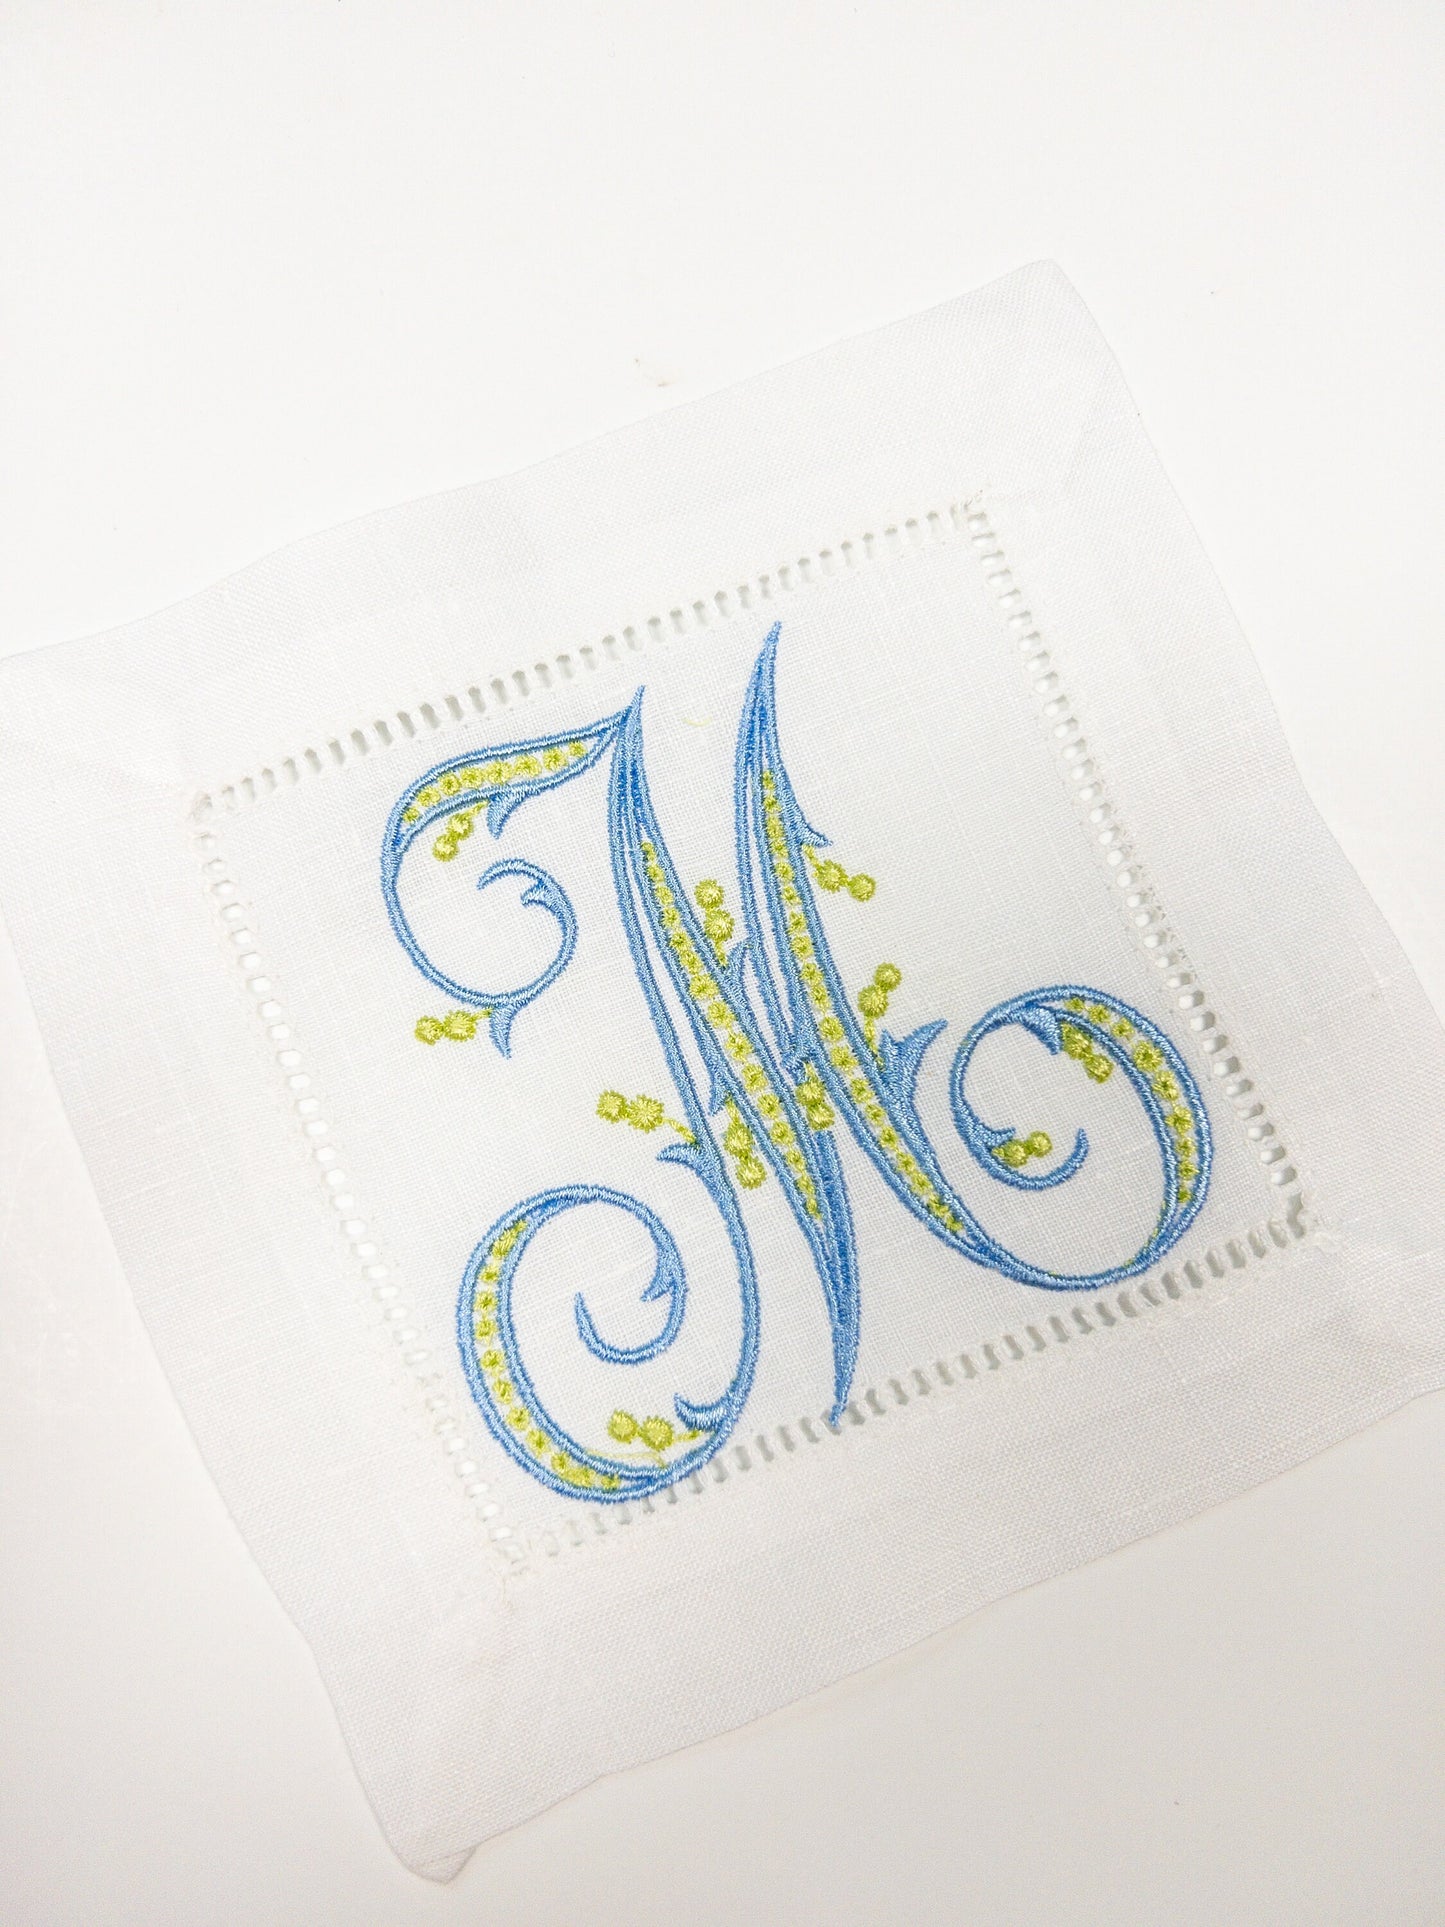 Fancy Monogramed Linen Cocktail Napkin, Multiple Colored Embroidered Cocktail Napkin